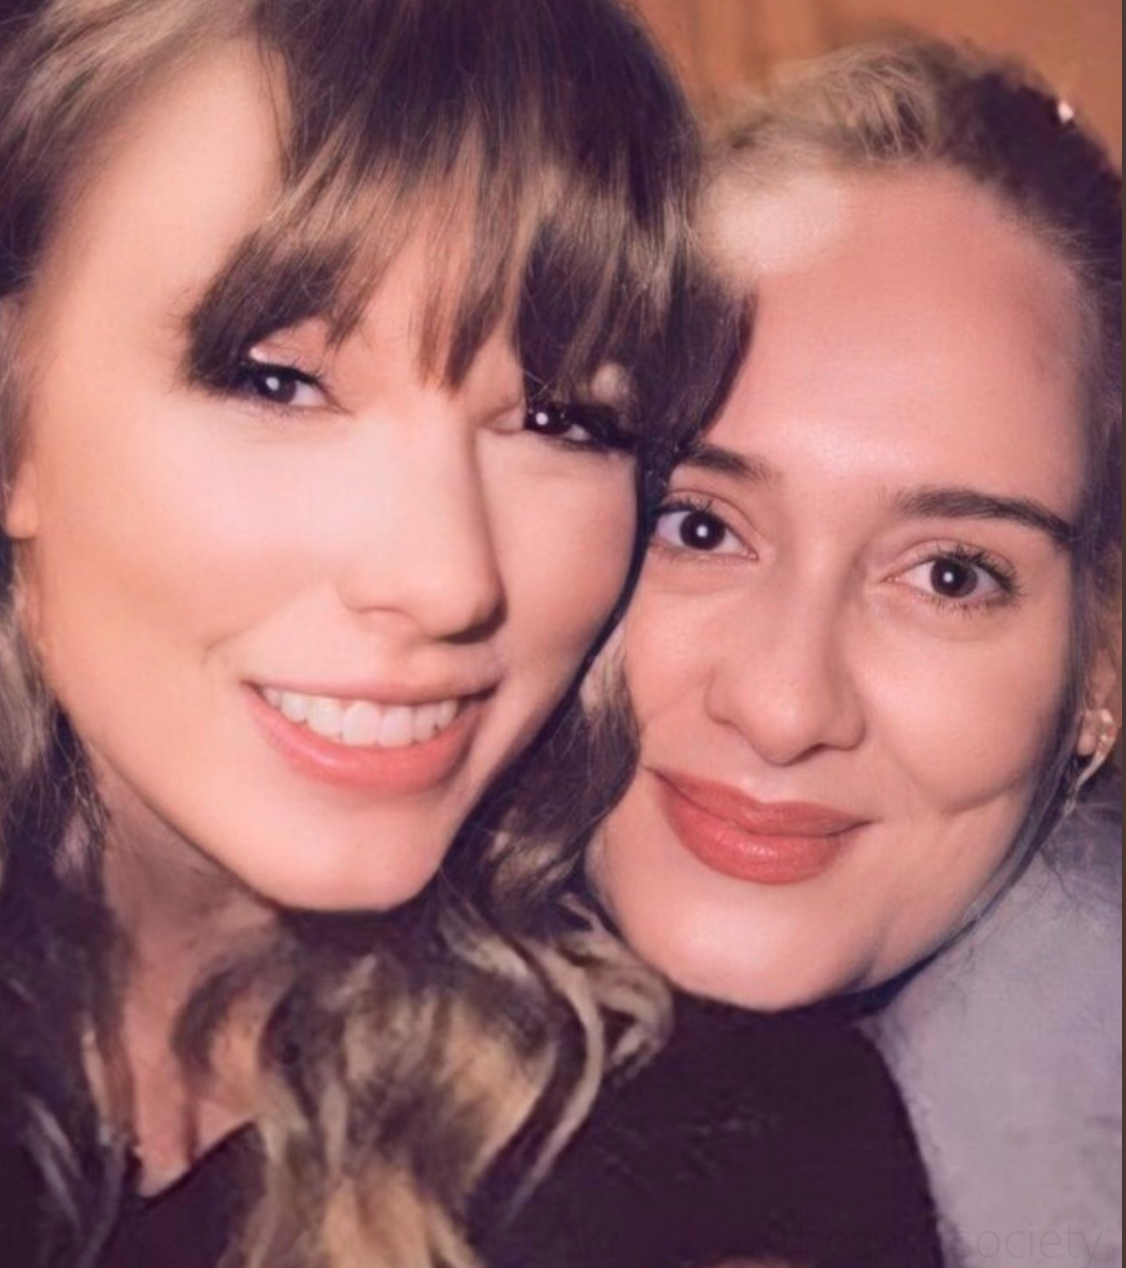 Adele Laurie Blue Adkins Sex Porn - Taylor Swift and Adele Spark Rumors They Have a New Song Together